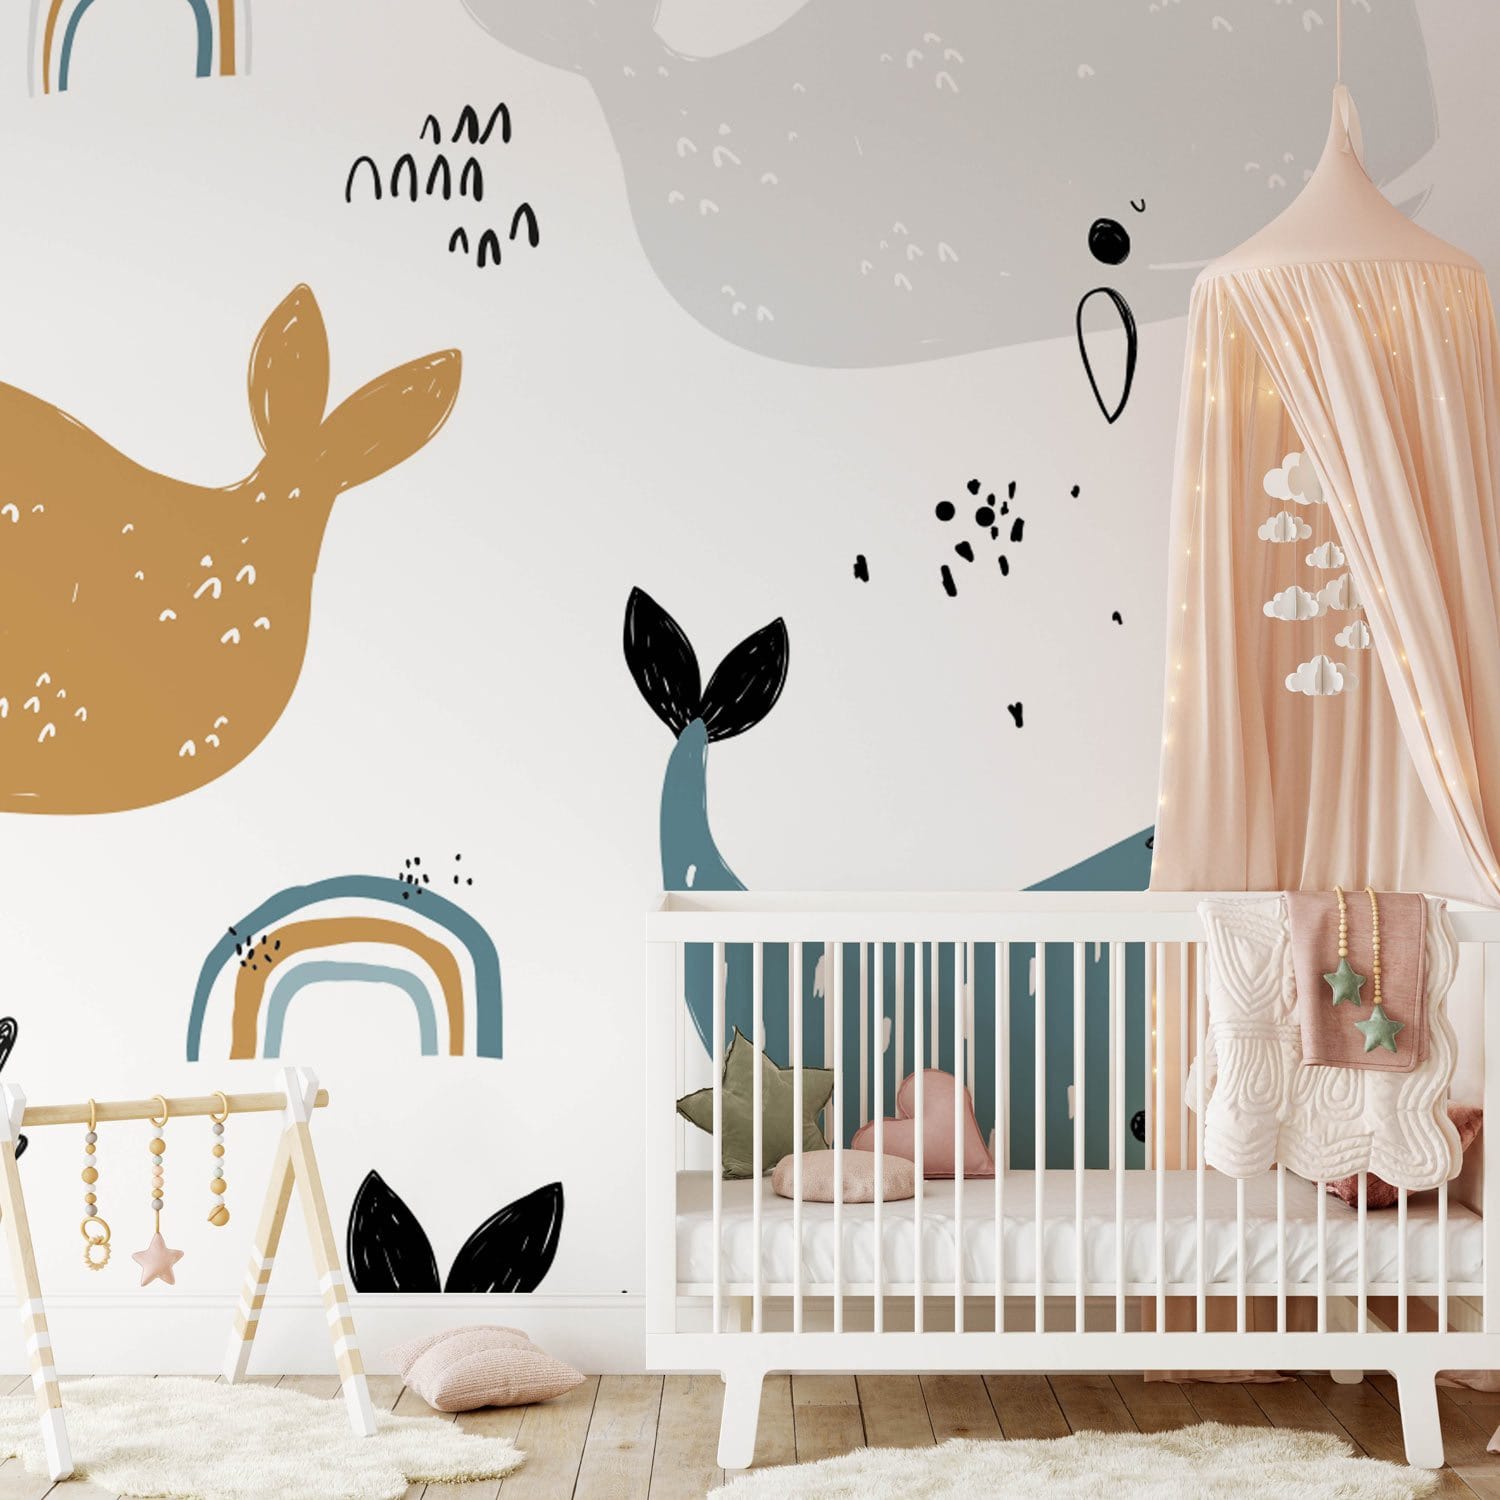 Wall mural with adorable whales for the nursery room